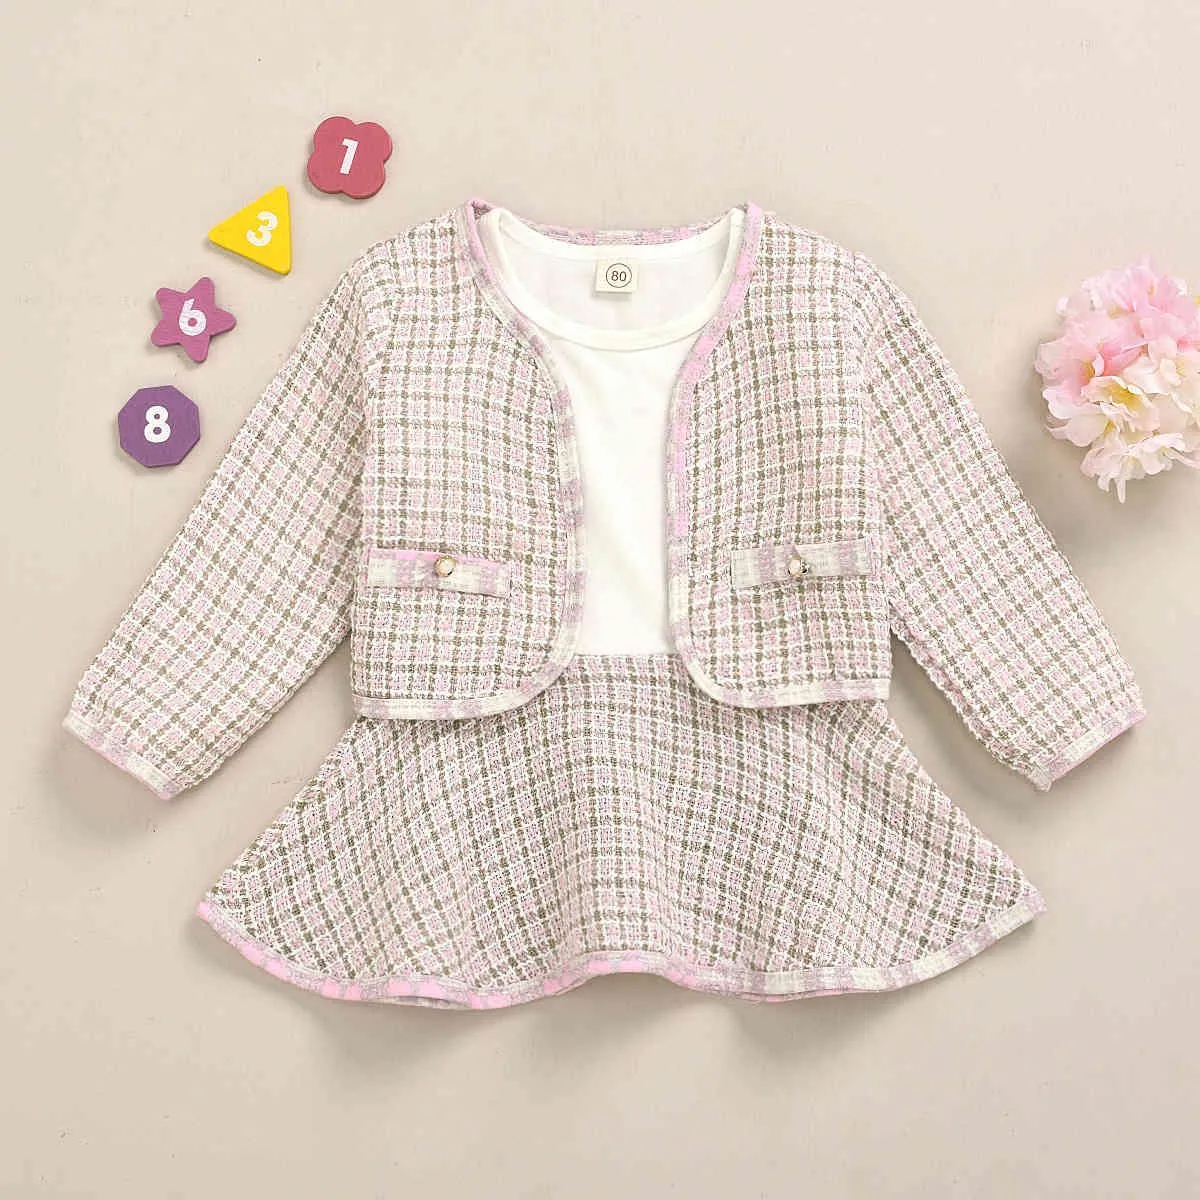 1-6 years old quality material designer two pieces of clothes and coats beatufil fashionable toddler girl suits cute little baby girl